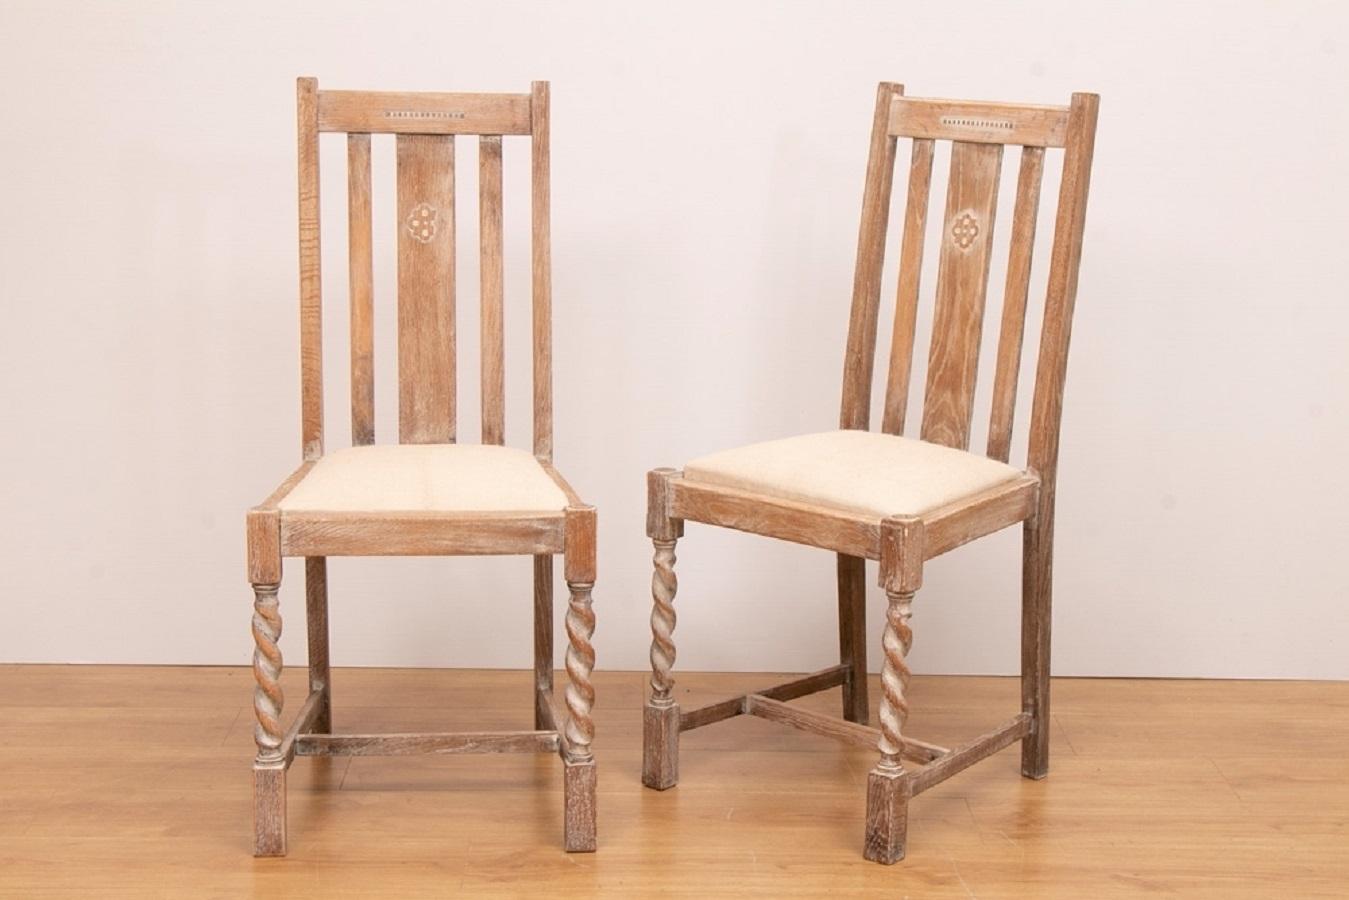 A set of four early 20th century limed oak frame dining chairs with barley twist legs and linen upholstered seats.

Measures: H: 100cm, W: 45cm, D: 47cm, seat height: 50cm.